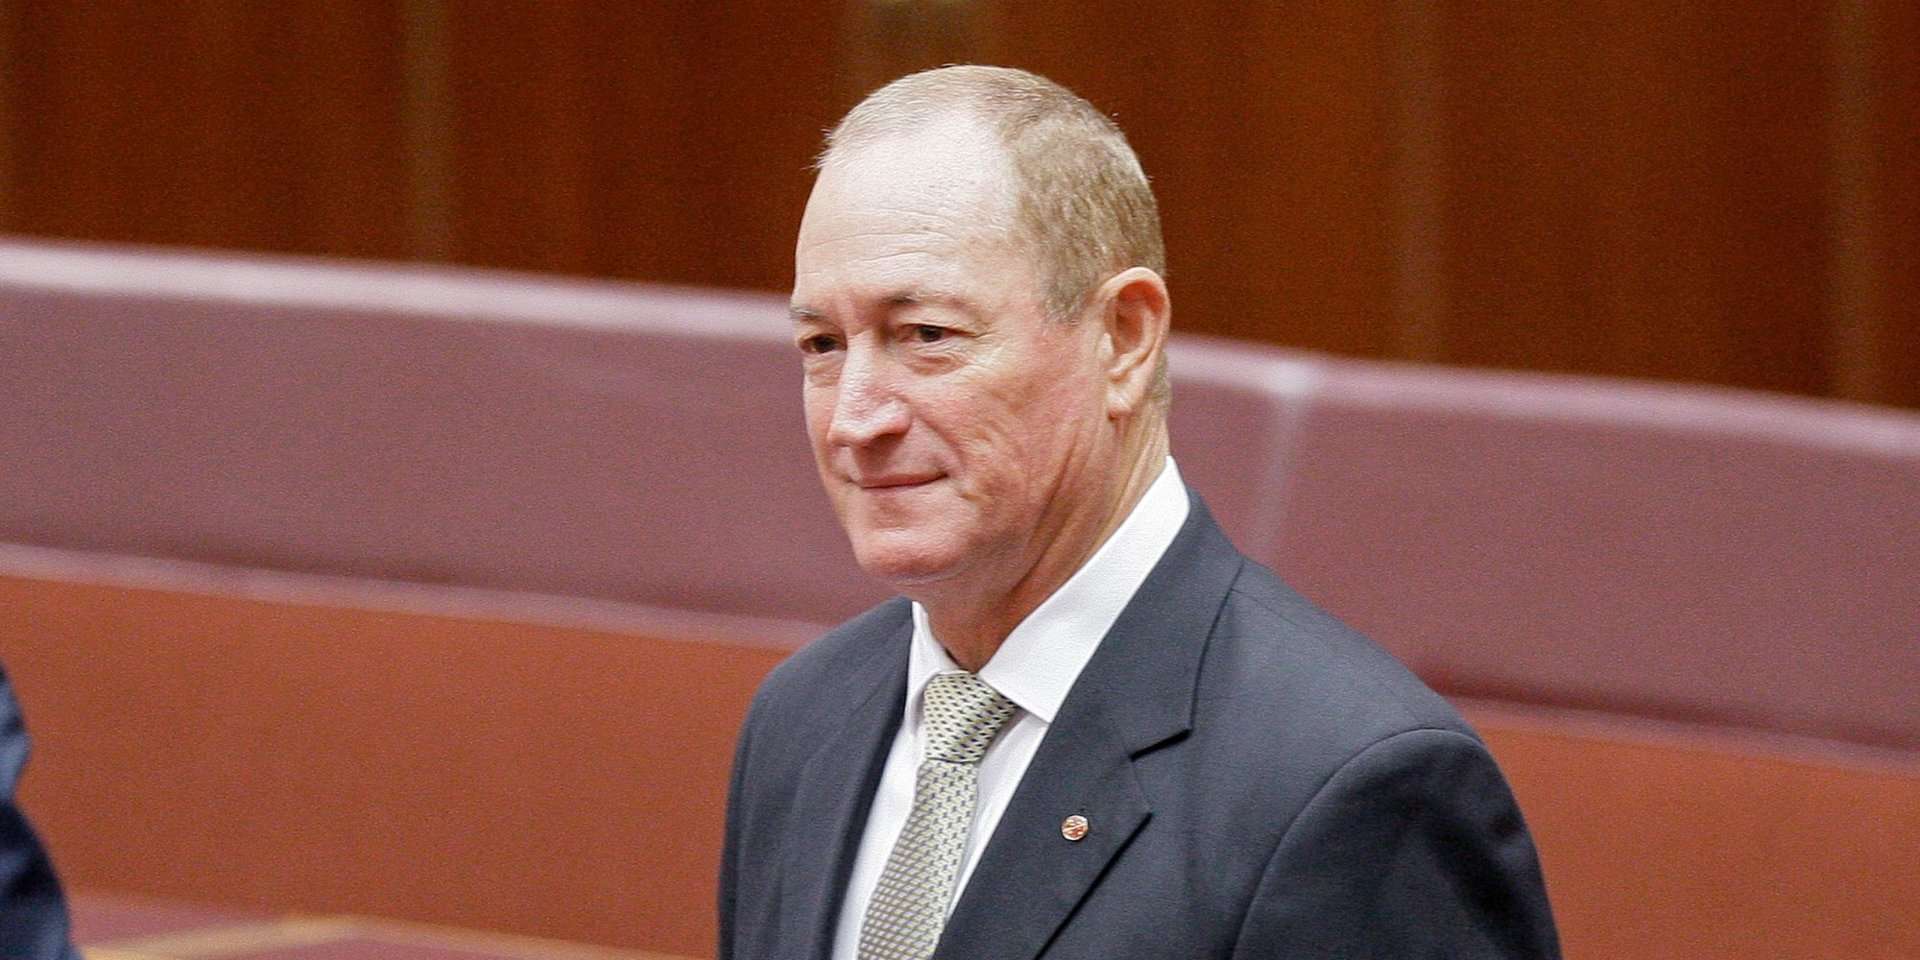 image for The far-right Australian politician who blamed the New Zealand mass shooting on immigration was voted out of office